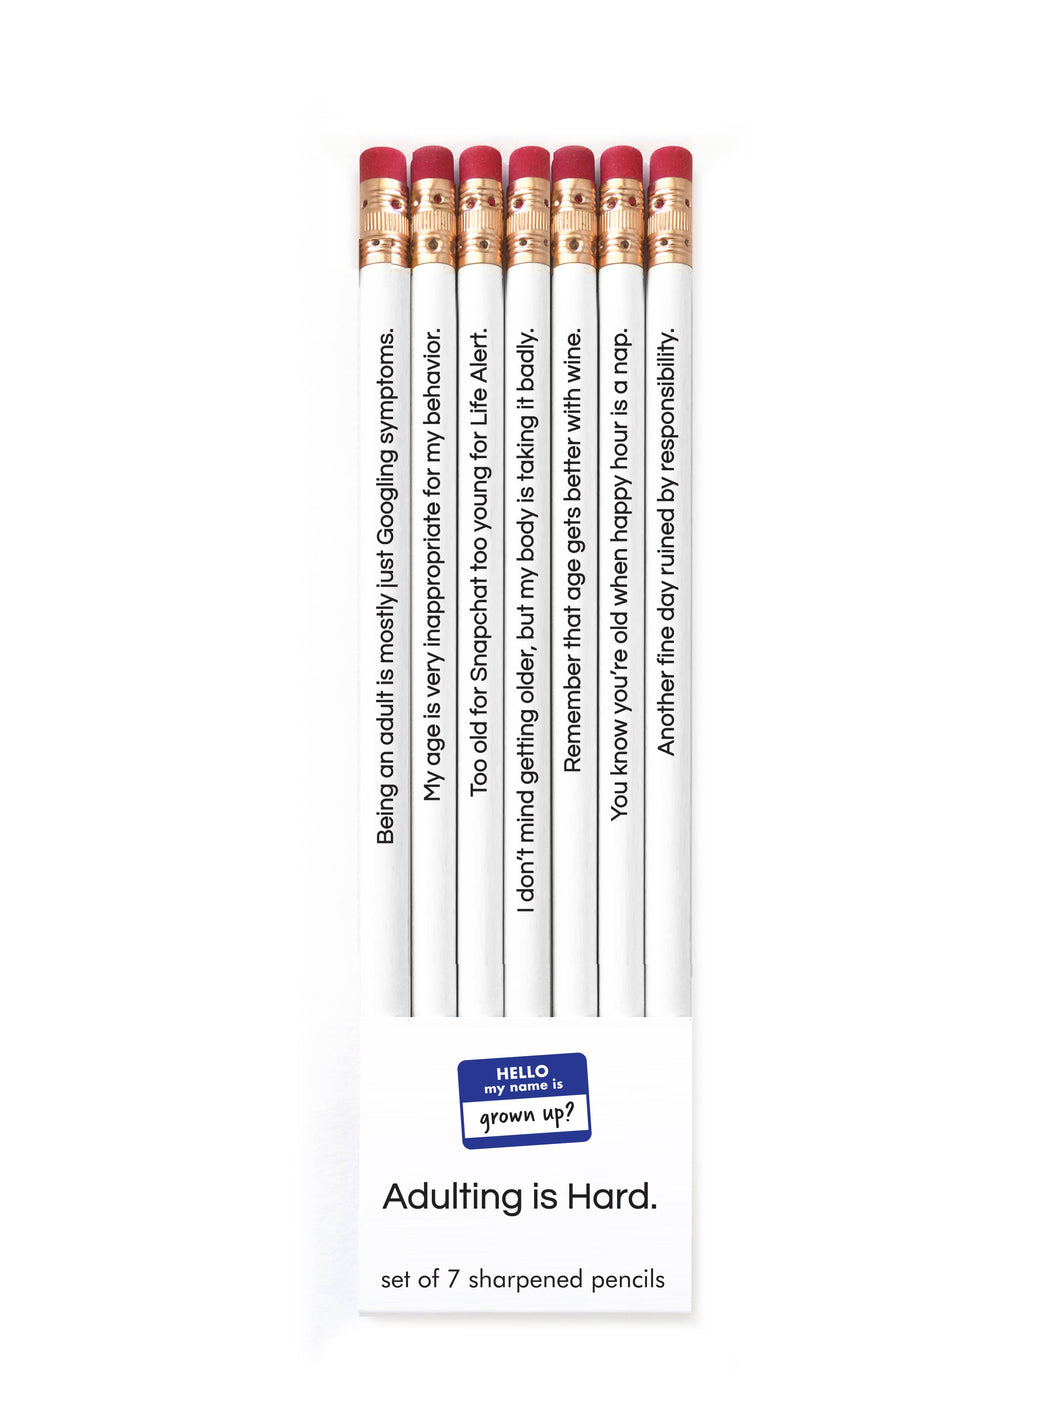 ADULTING IS HARD HEART PENCIL SET